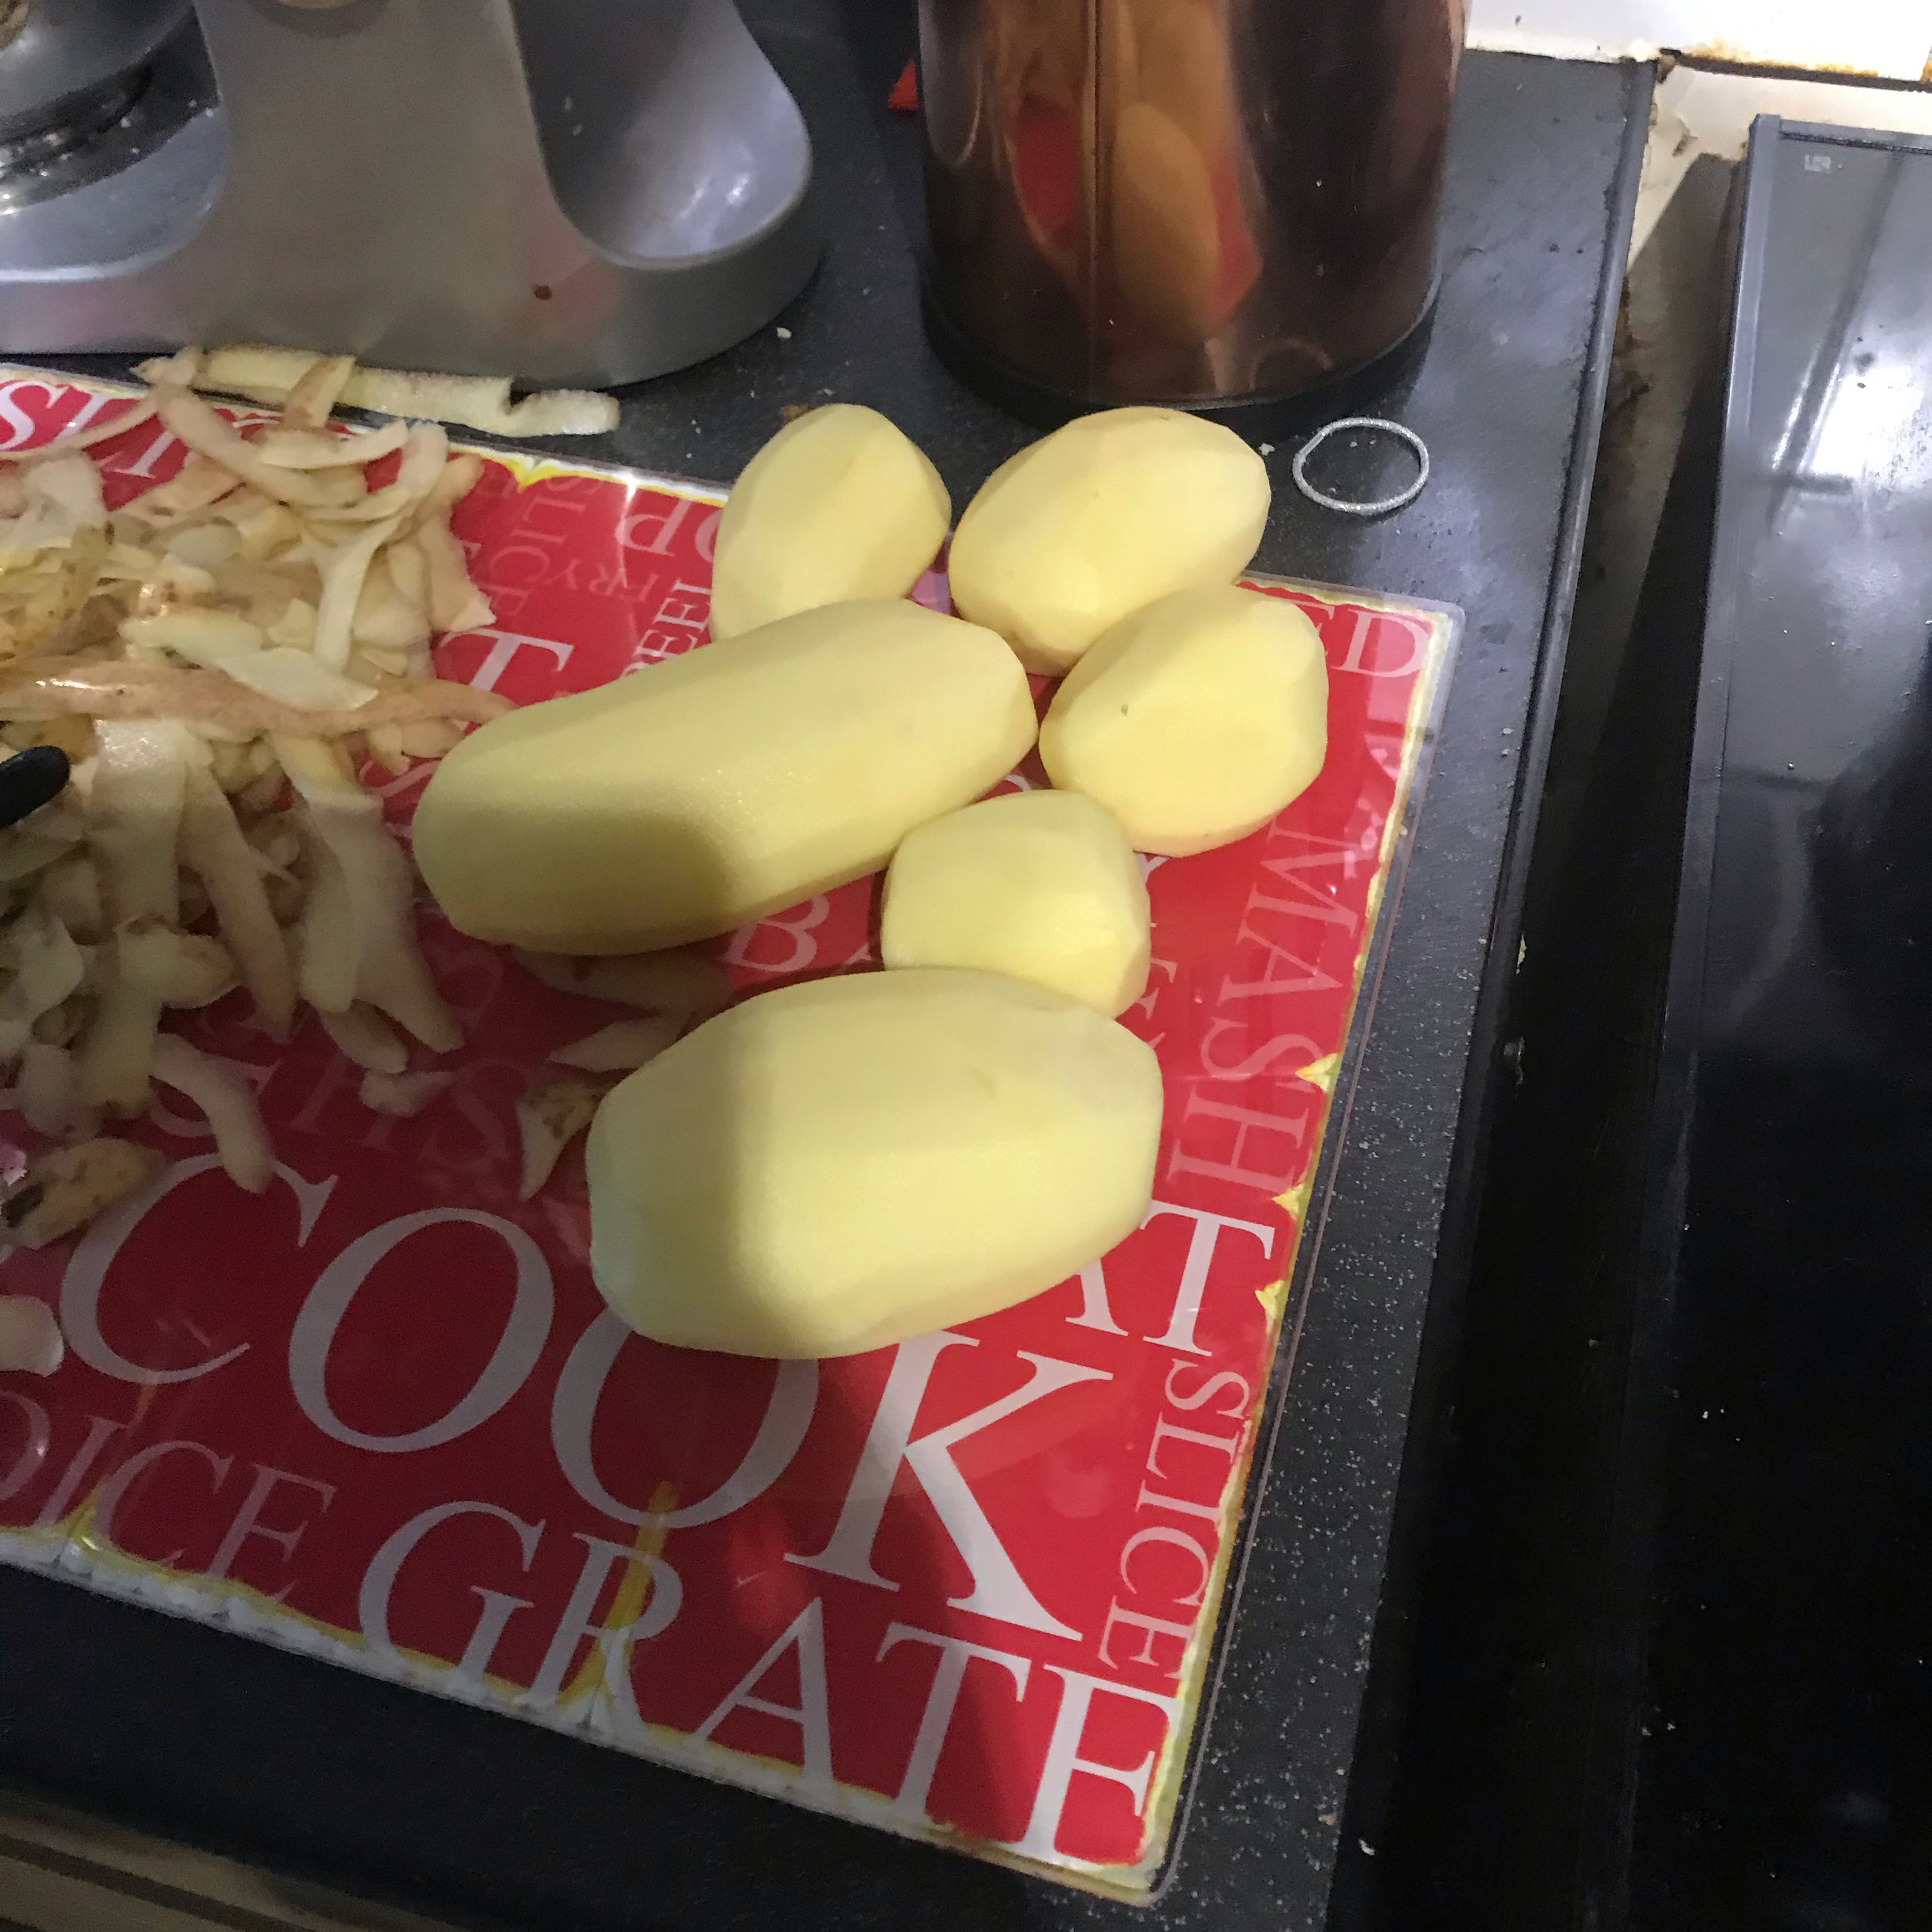 Peel and dice 6-8 potatoes into 1 inch cube